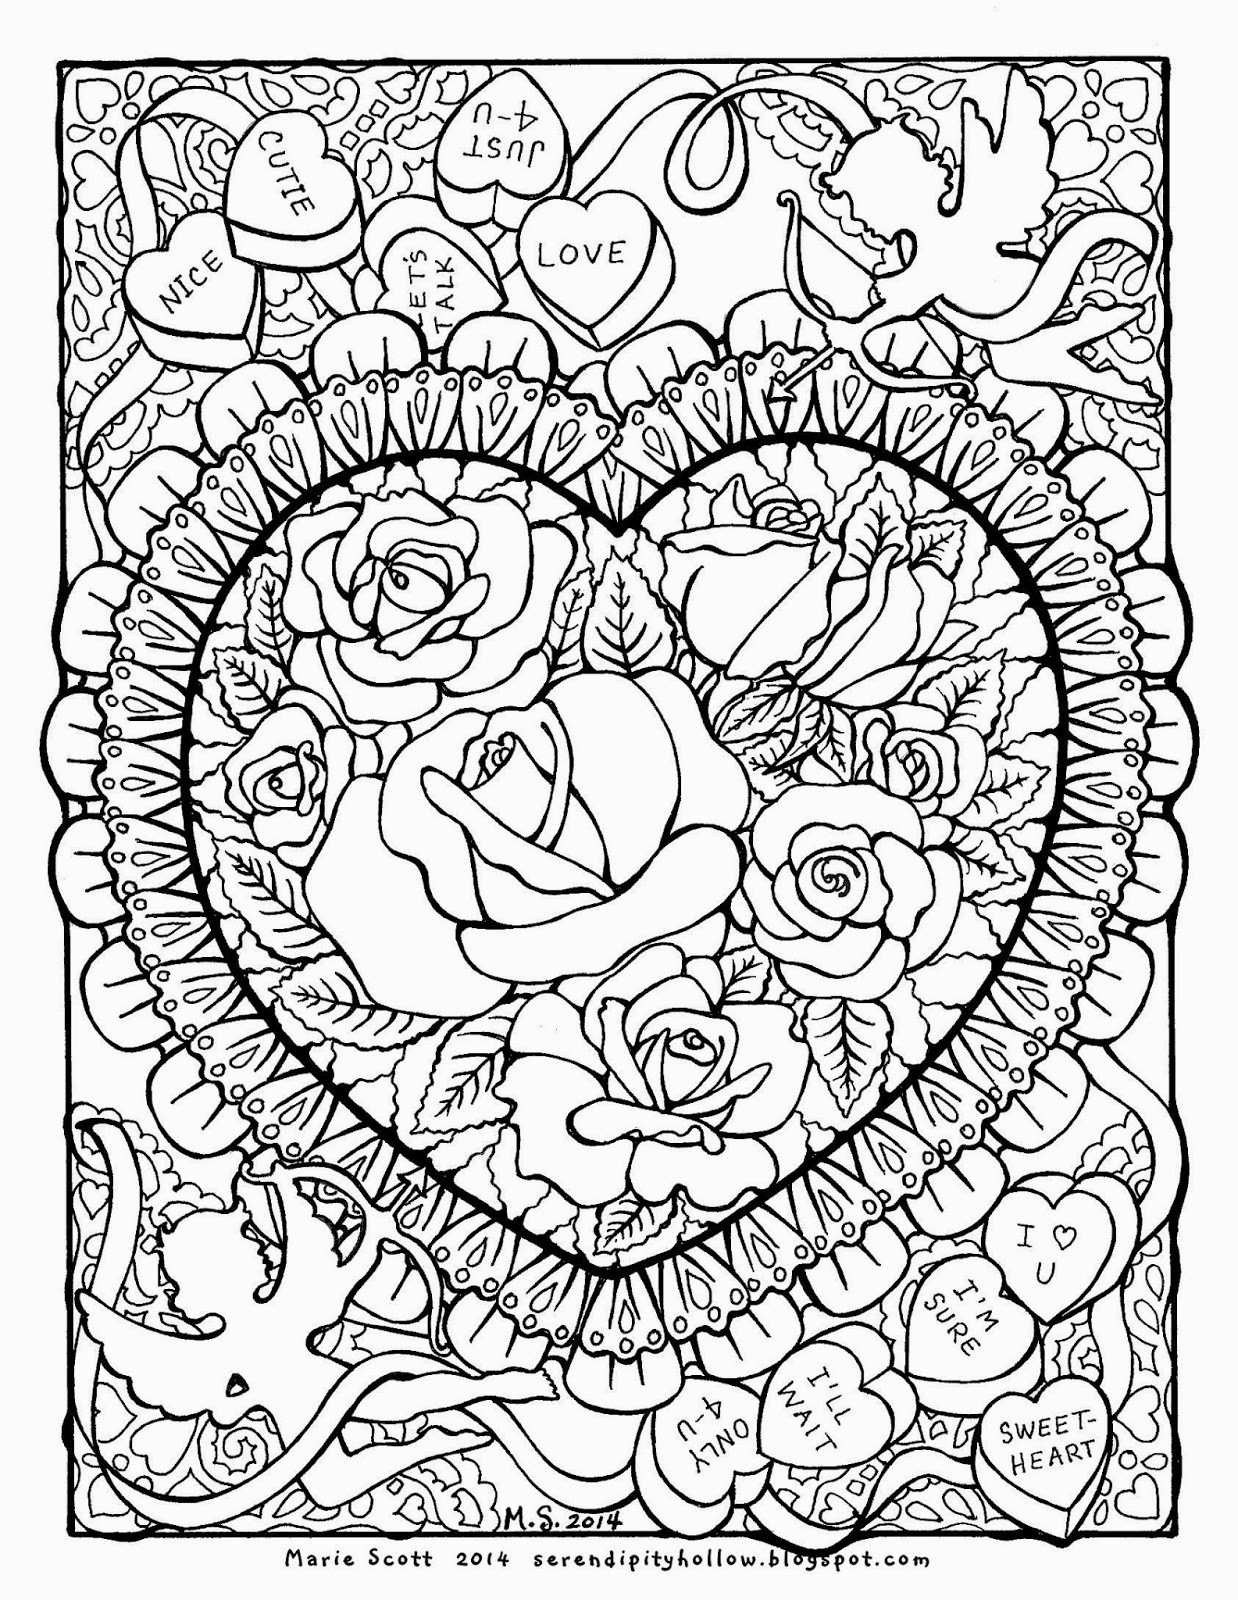 Printable Adult Coloring Pages
 Serendipity Hollow Coloring book Page February